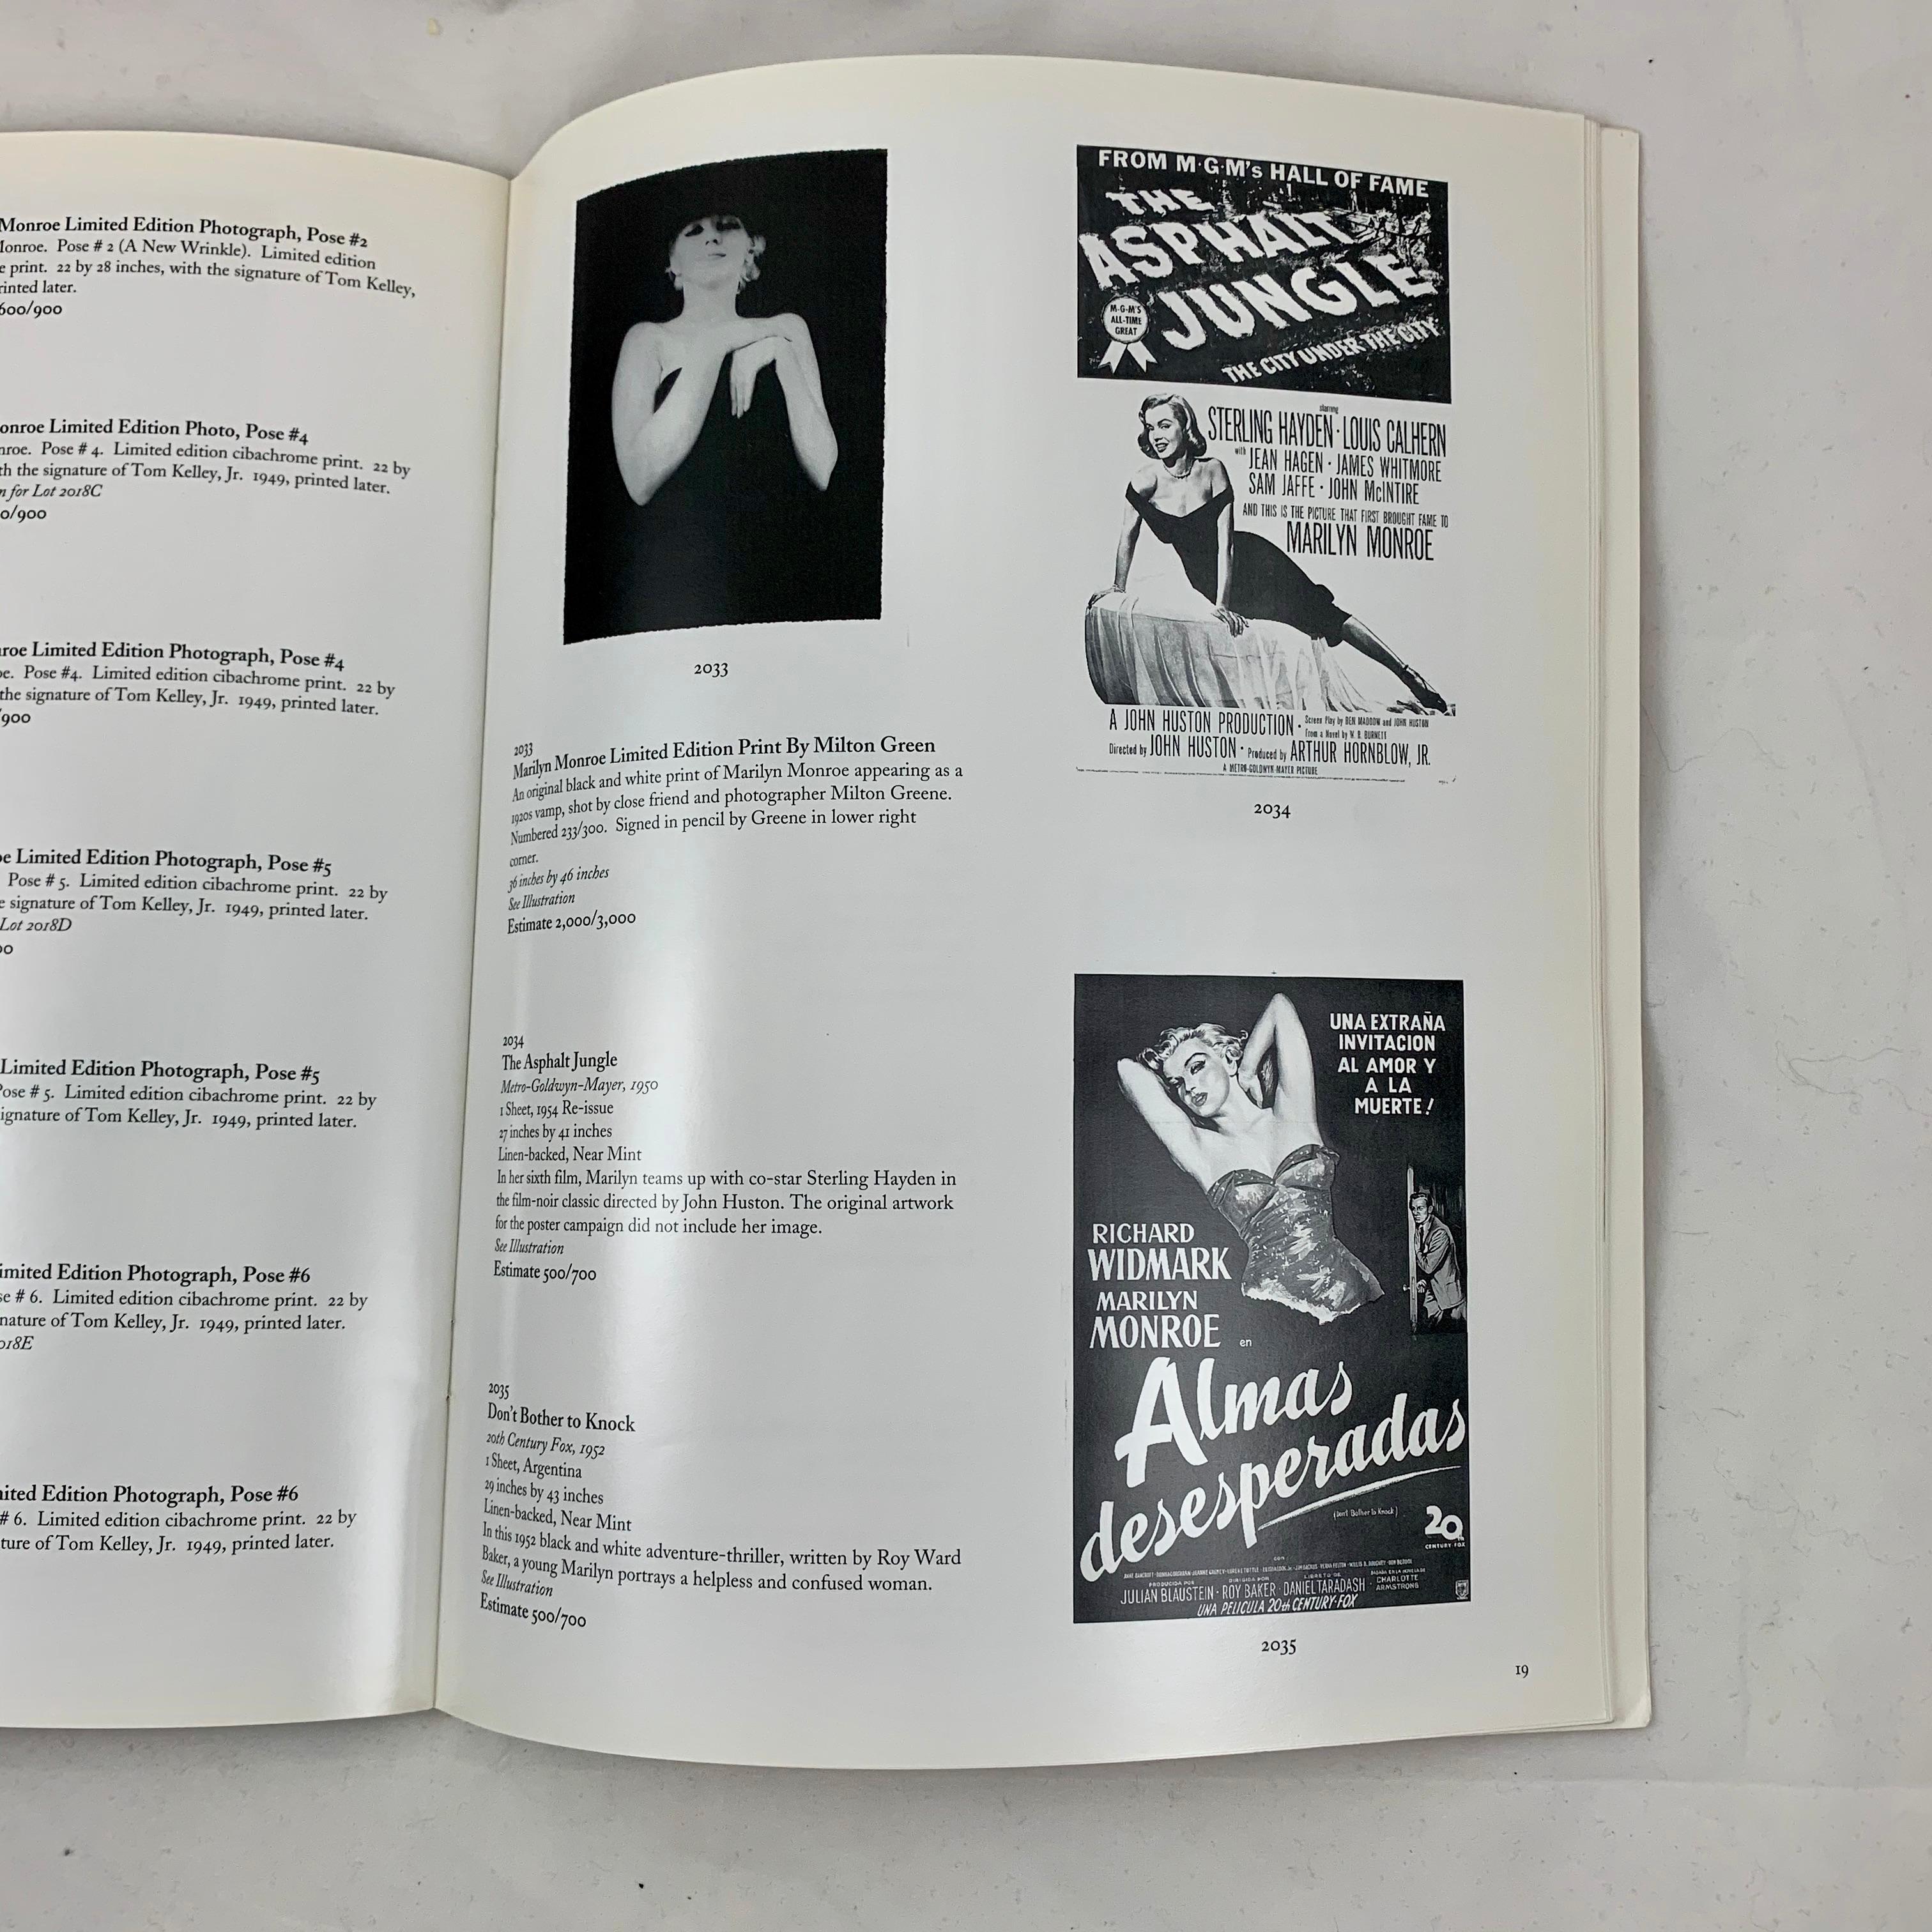 Contemporary Butterfields Auction Catalogue, Marilyn Monroe, The Red Velvet Images, 2001